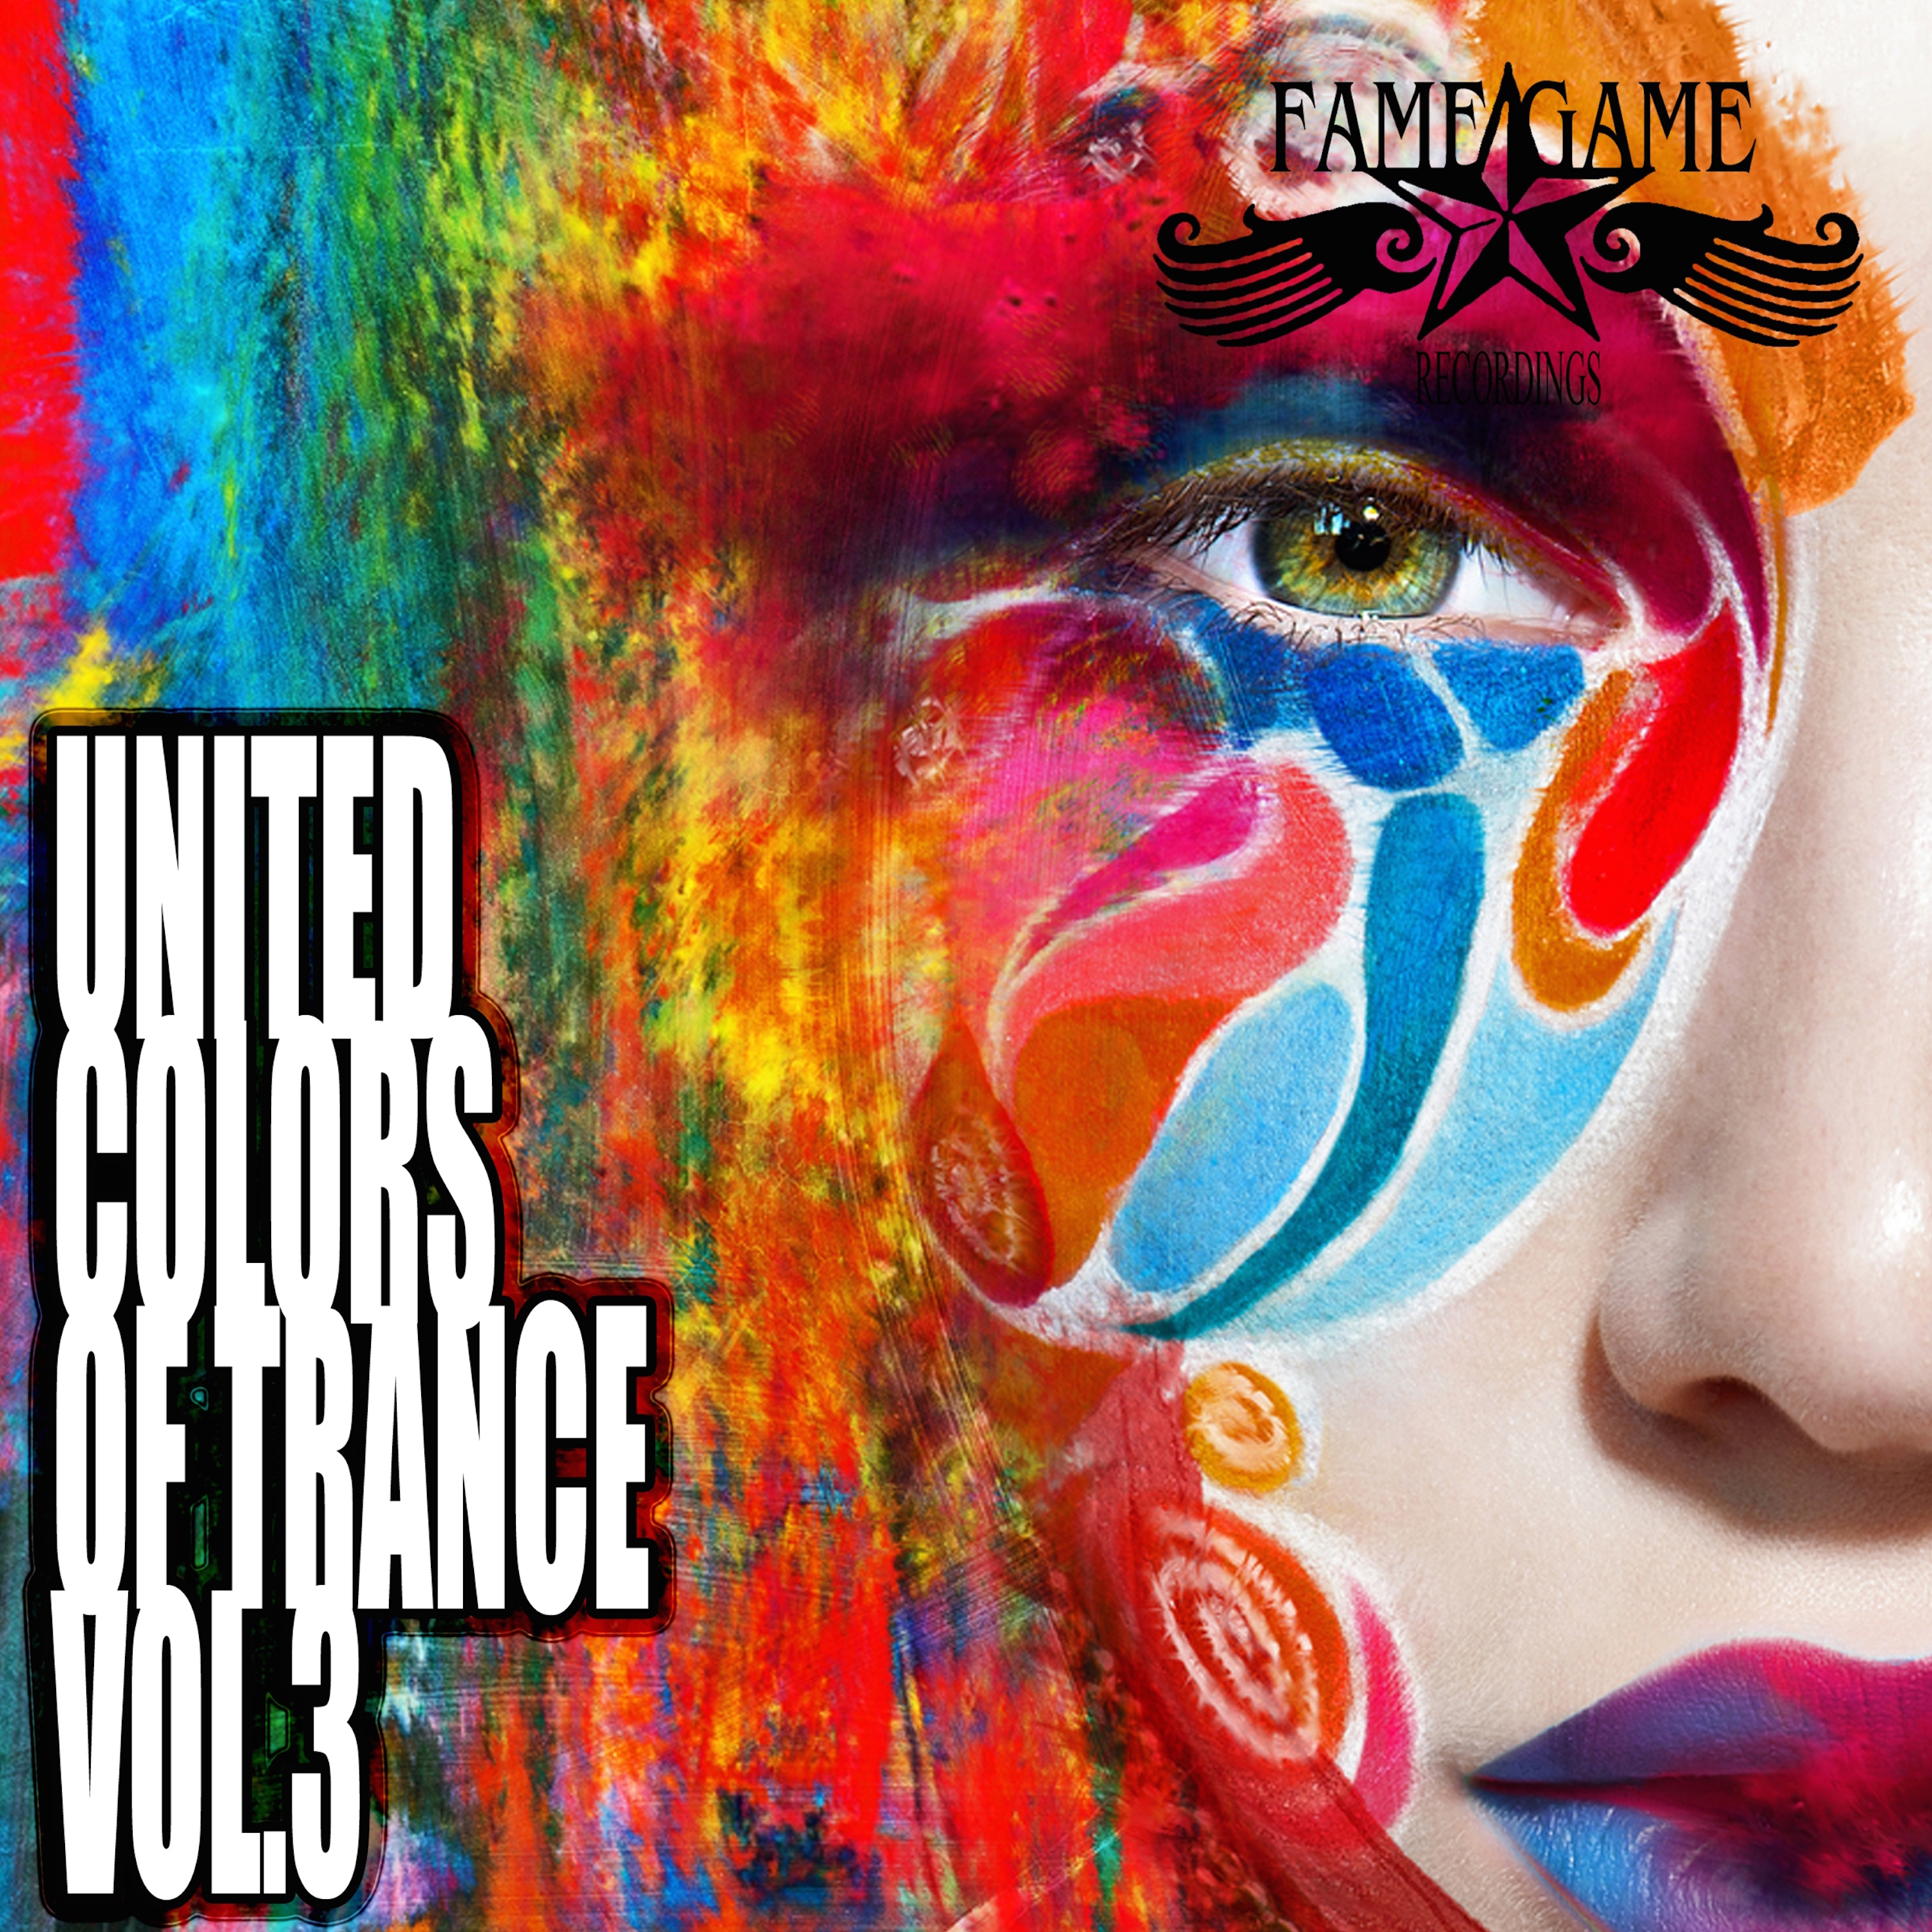 United Colours of Trance, Vol. 3